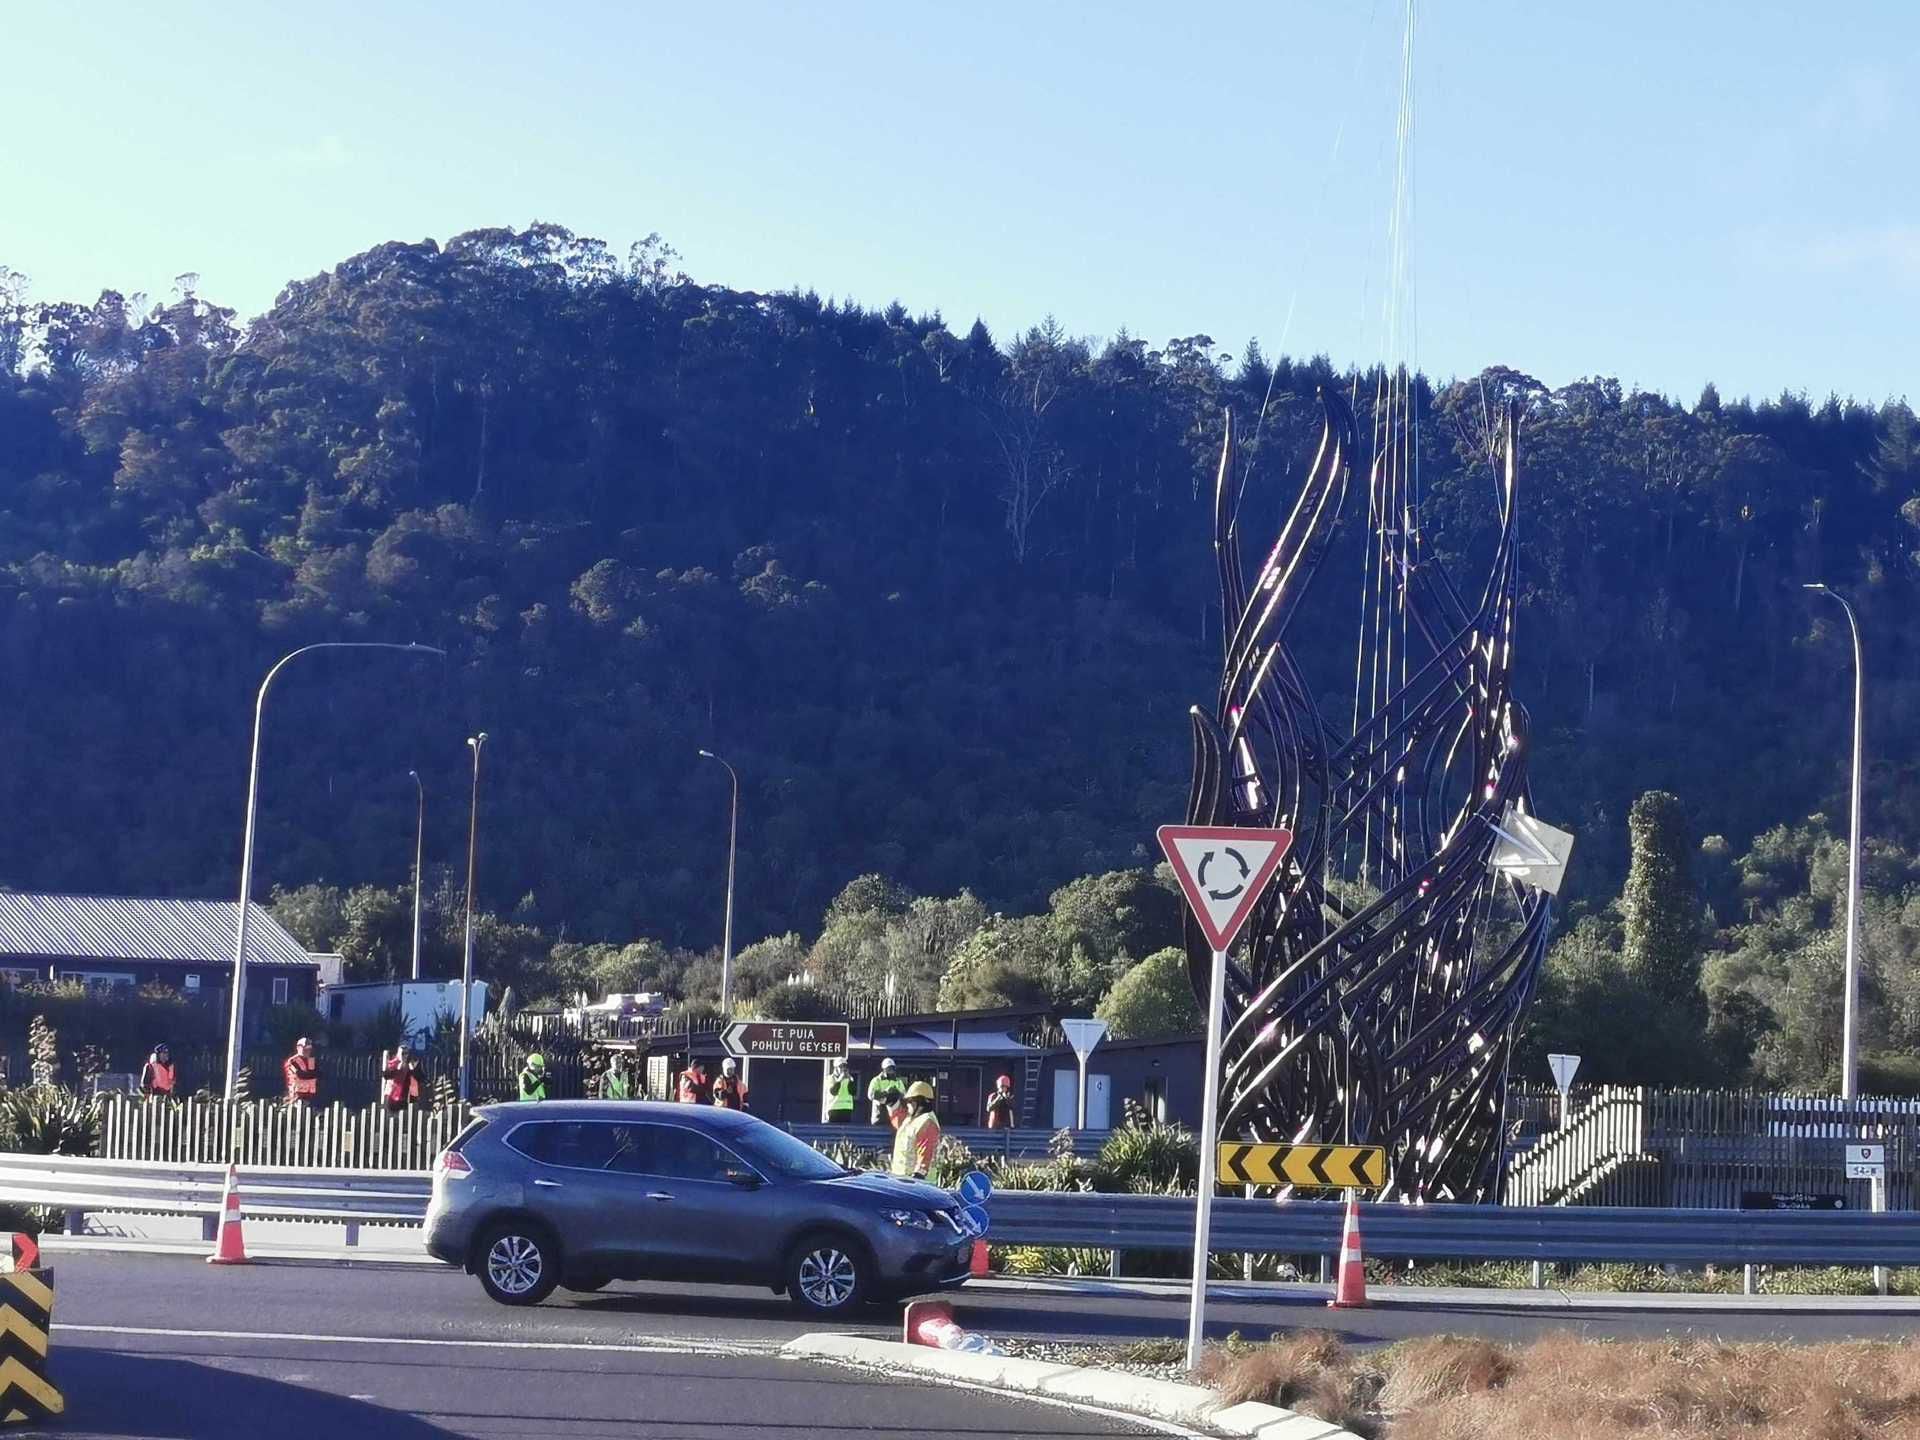 Hemo Rd roundabout to be completed next month - NZ Herald